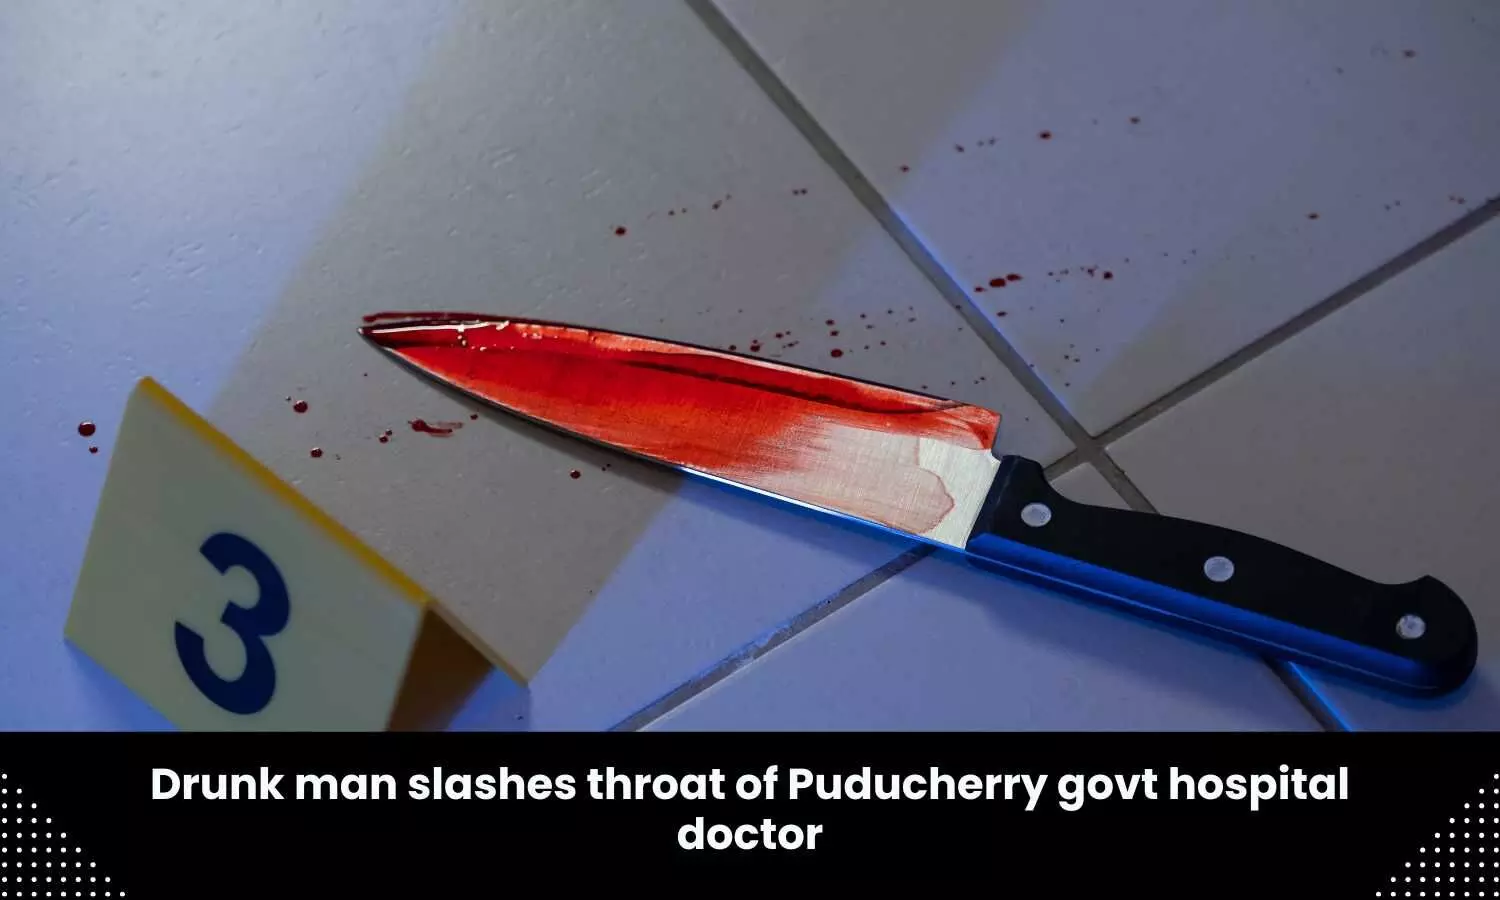 Drunk man slashes throat of 31 year old doctor